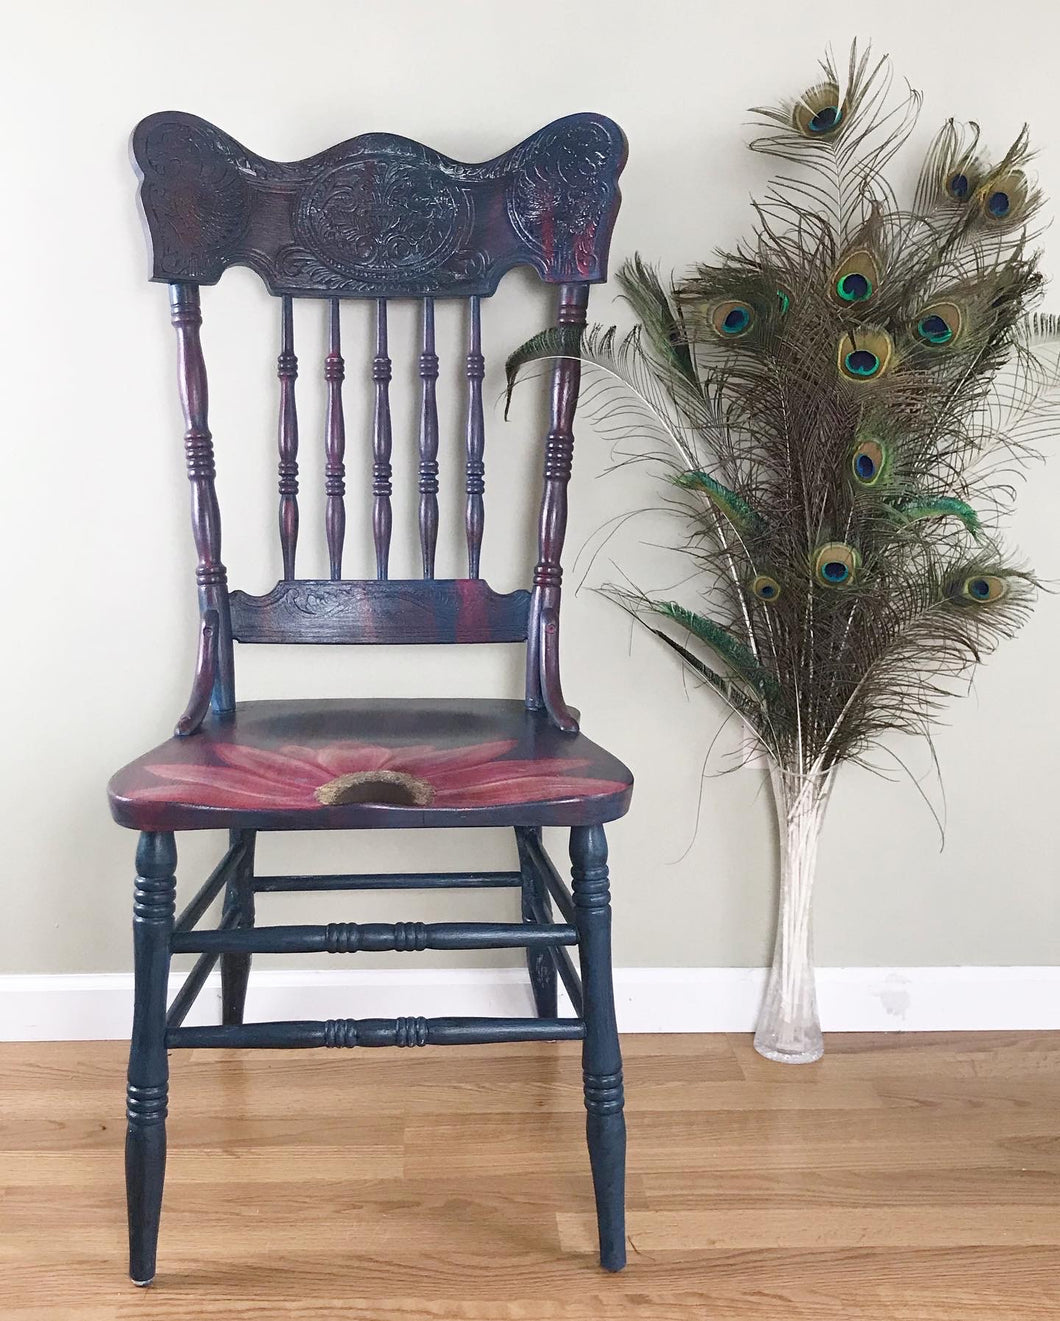 Rustic Farmhouse Daisy Accent Chair - hand painted - floral - bohemian - furniture art - pink - blue